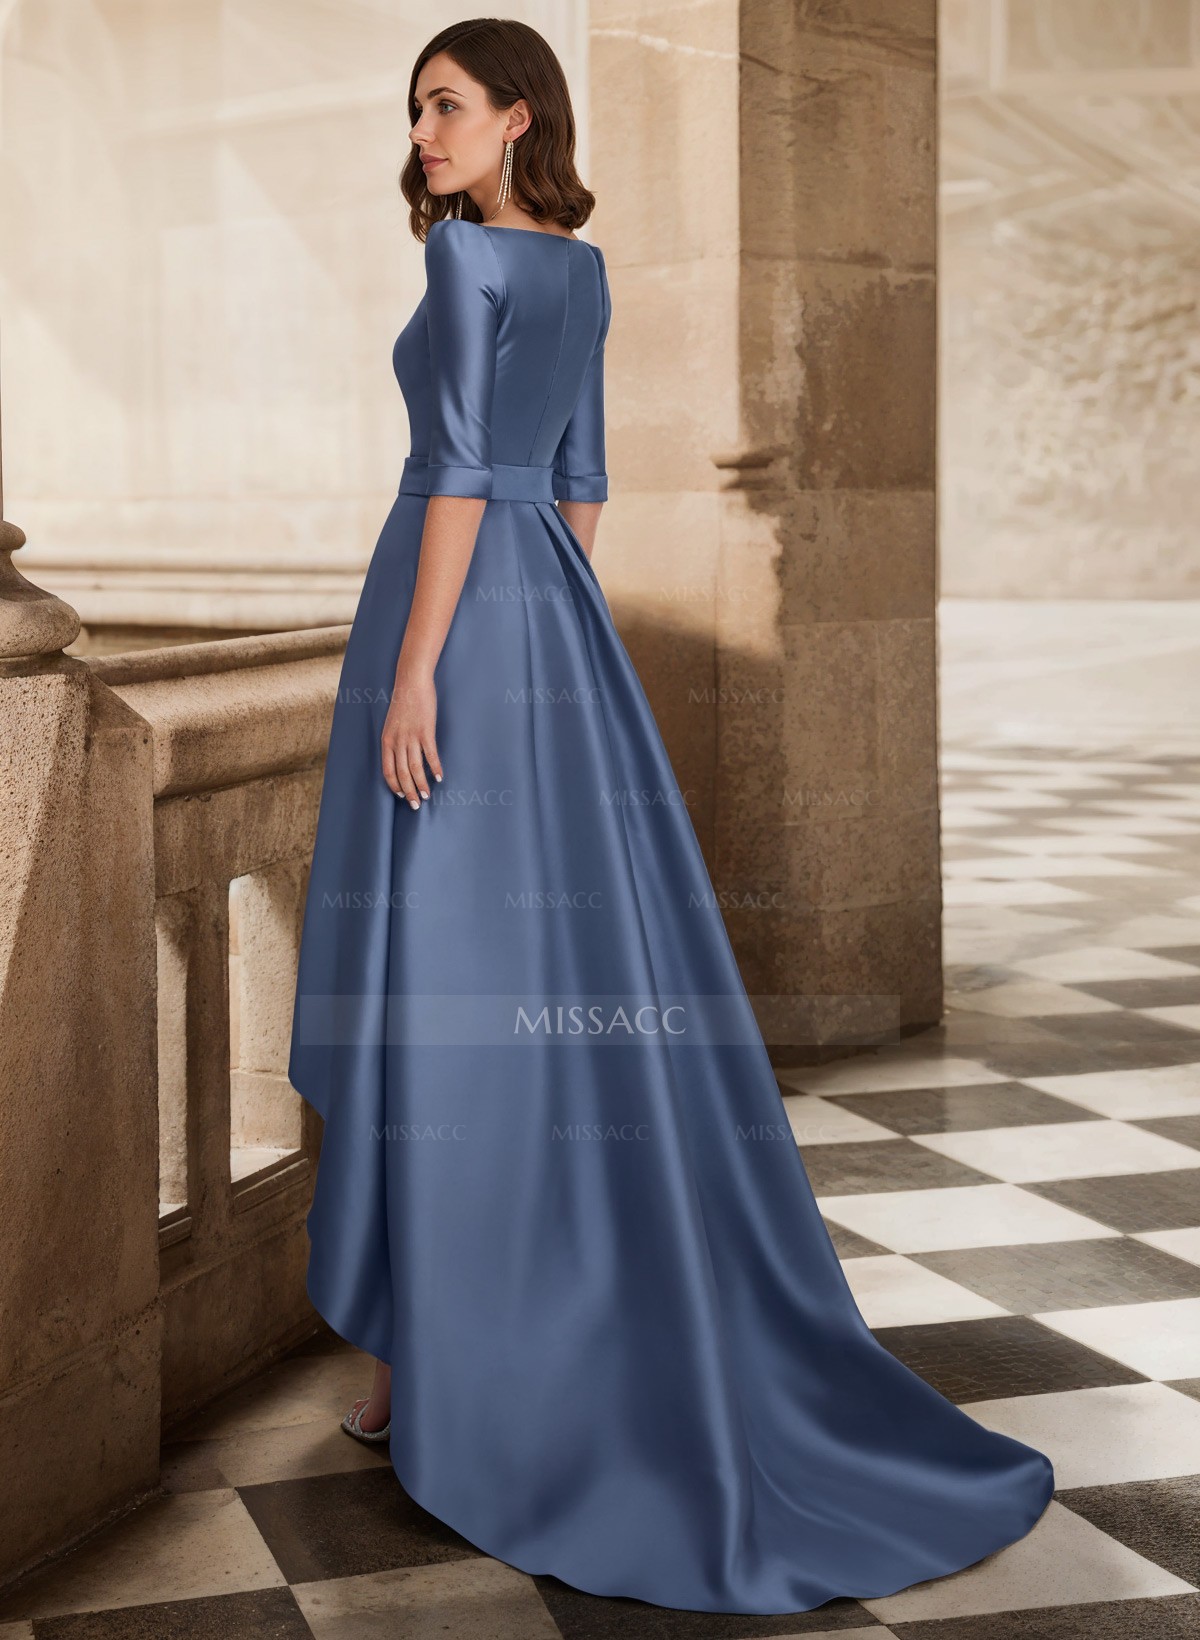 A-Line V-Neck 1/2 Sleeves Sweep Train Satin Bridesmaid Dresses With Pockets